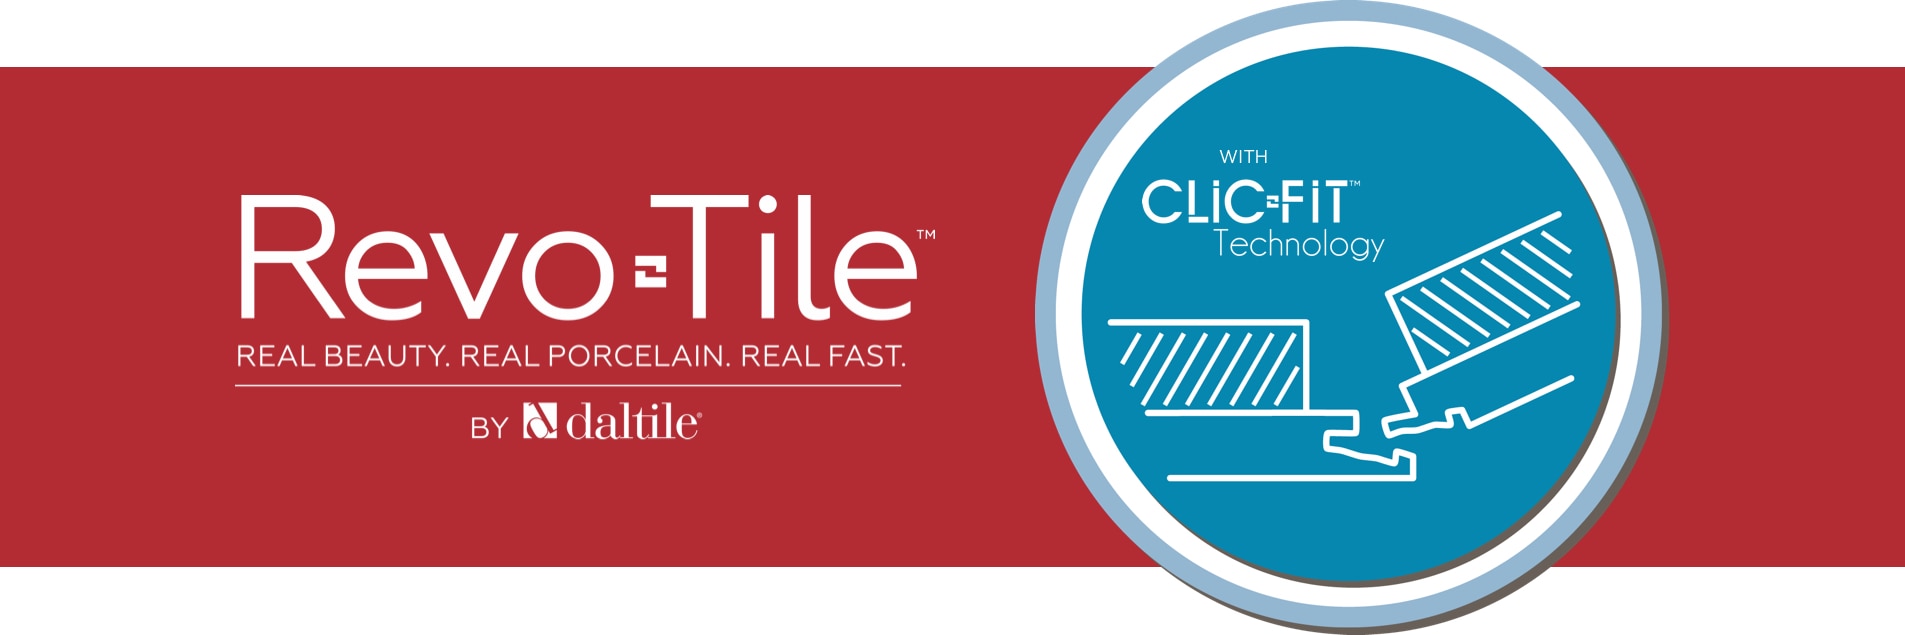 RevoTile with ClicFit Technology by Daltile. Real Beauty. Real Porcelain, Real Fast.